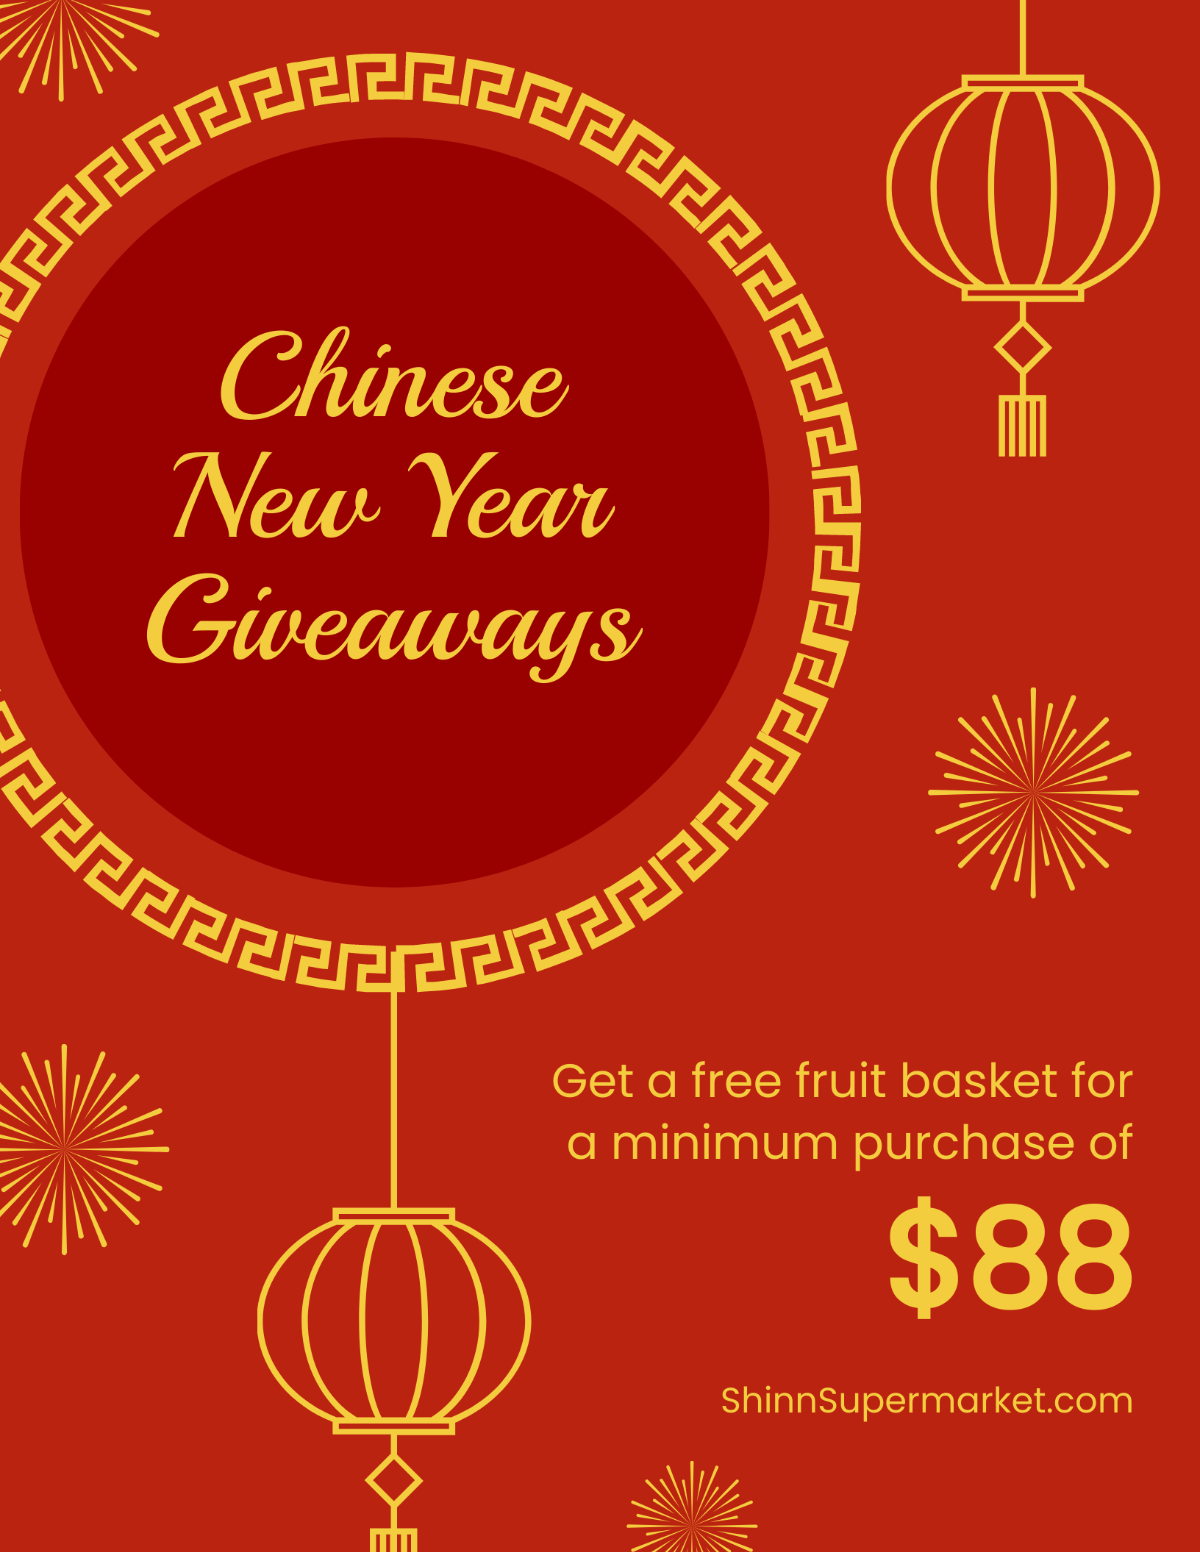 Chinese New Year Giveaway Flyer Template